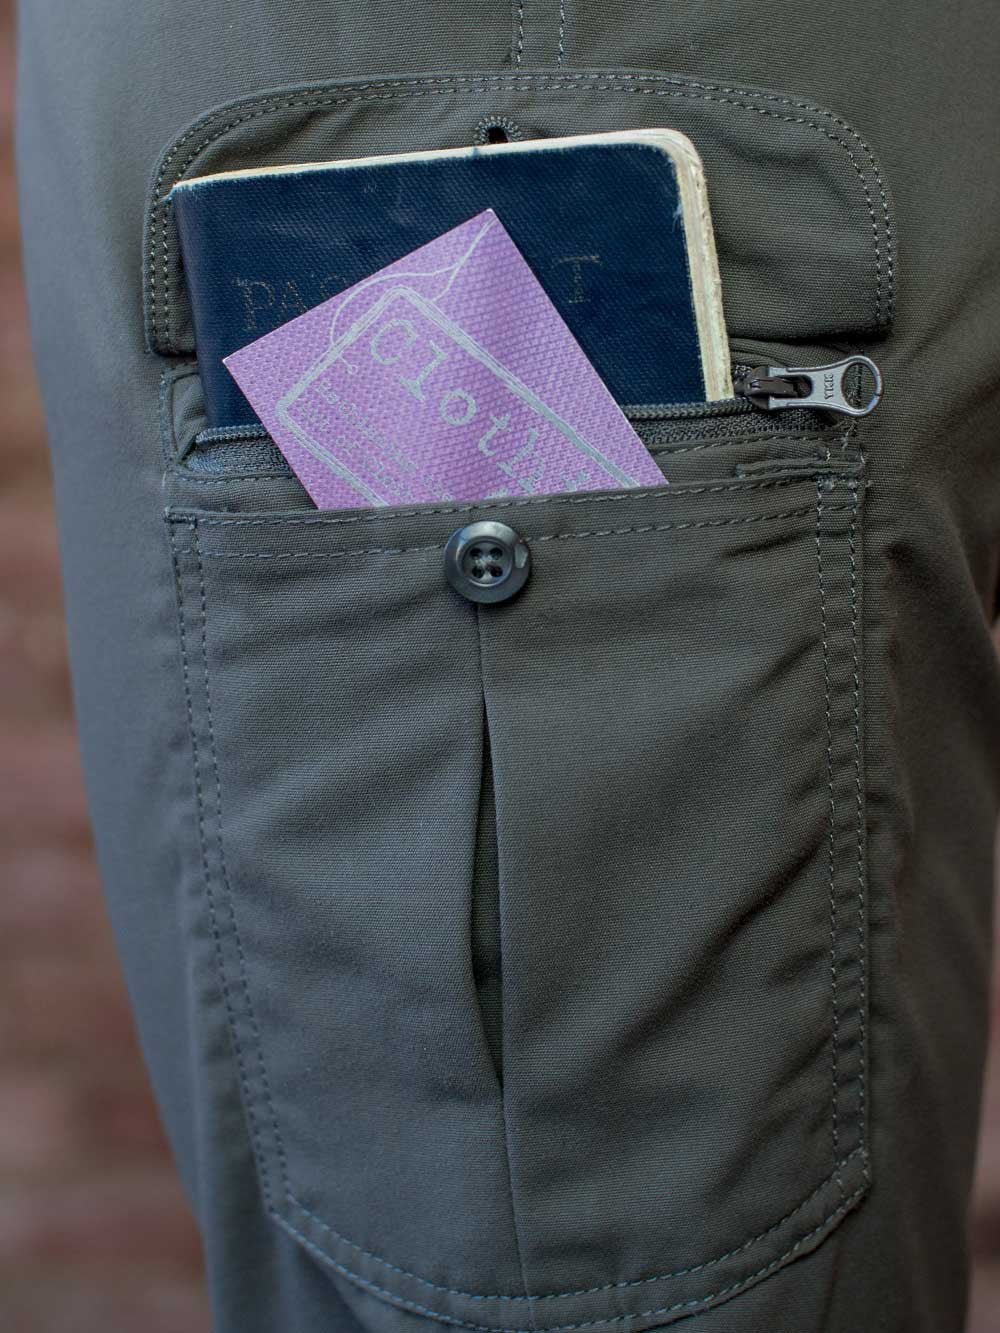 Form Meets Function with Women's Hidden Pocket Clothing for Travel